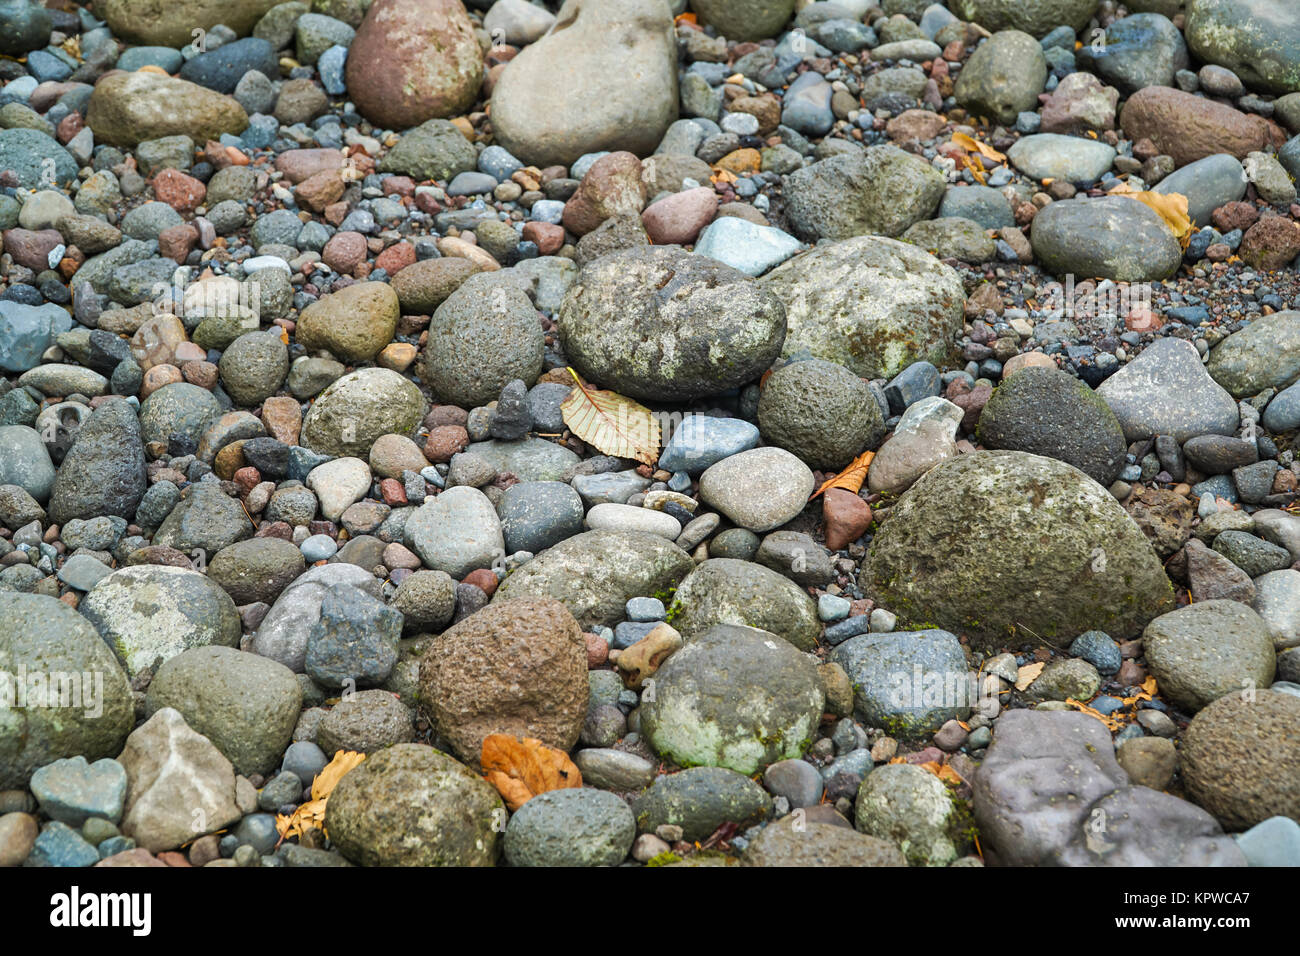 Collection of small rocks and pebbles, rounded in shape. Stock Photo